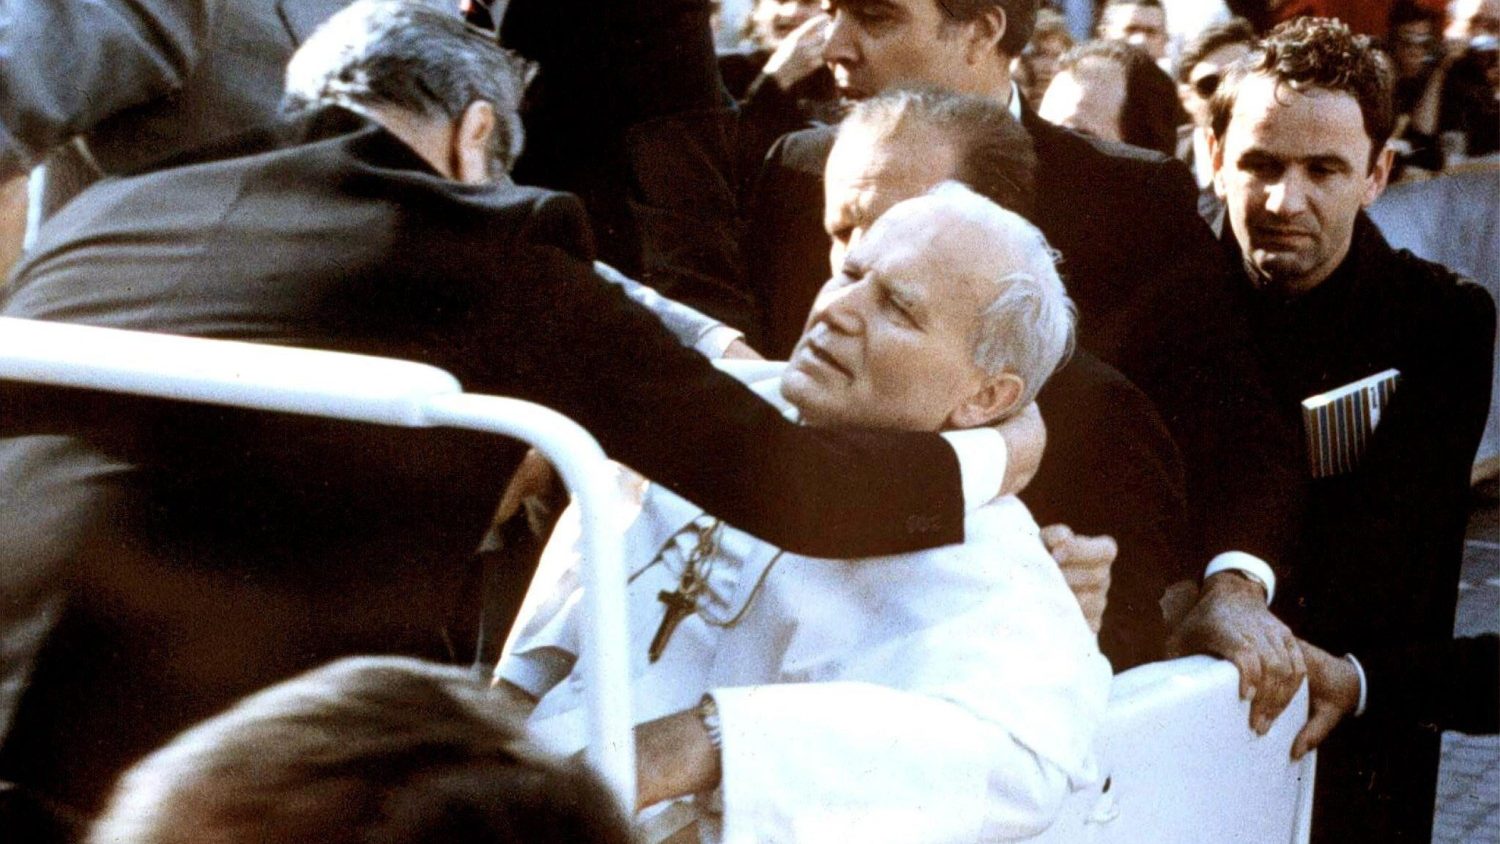 May 1981: Remembering that day - Vatican News